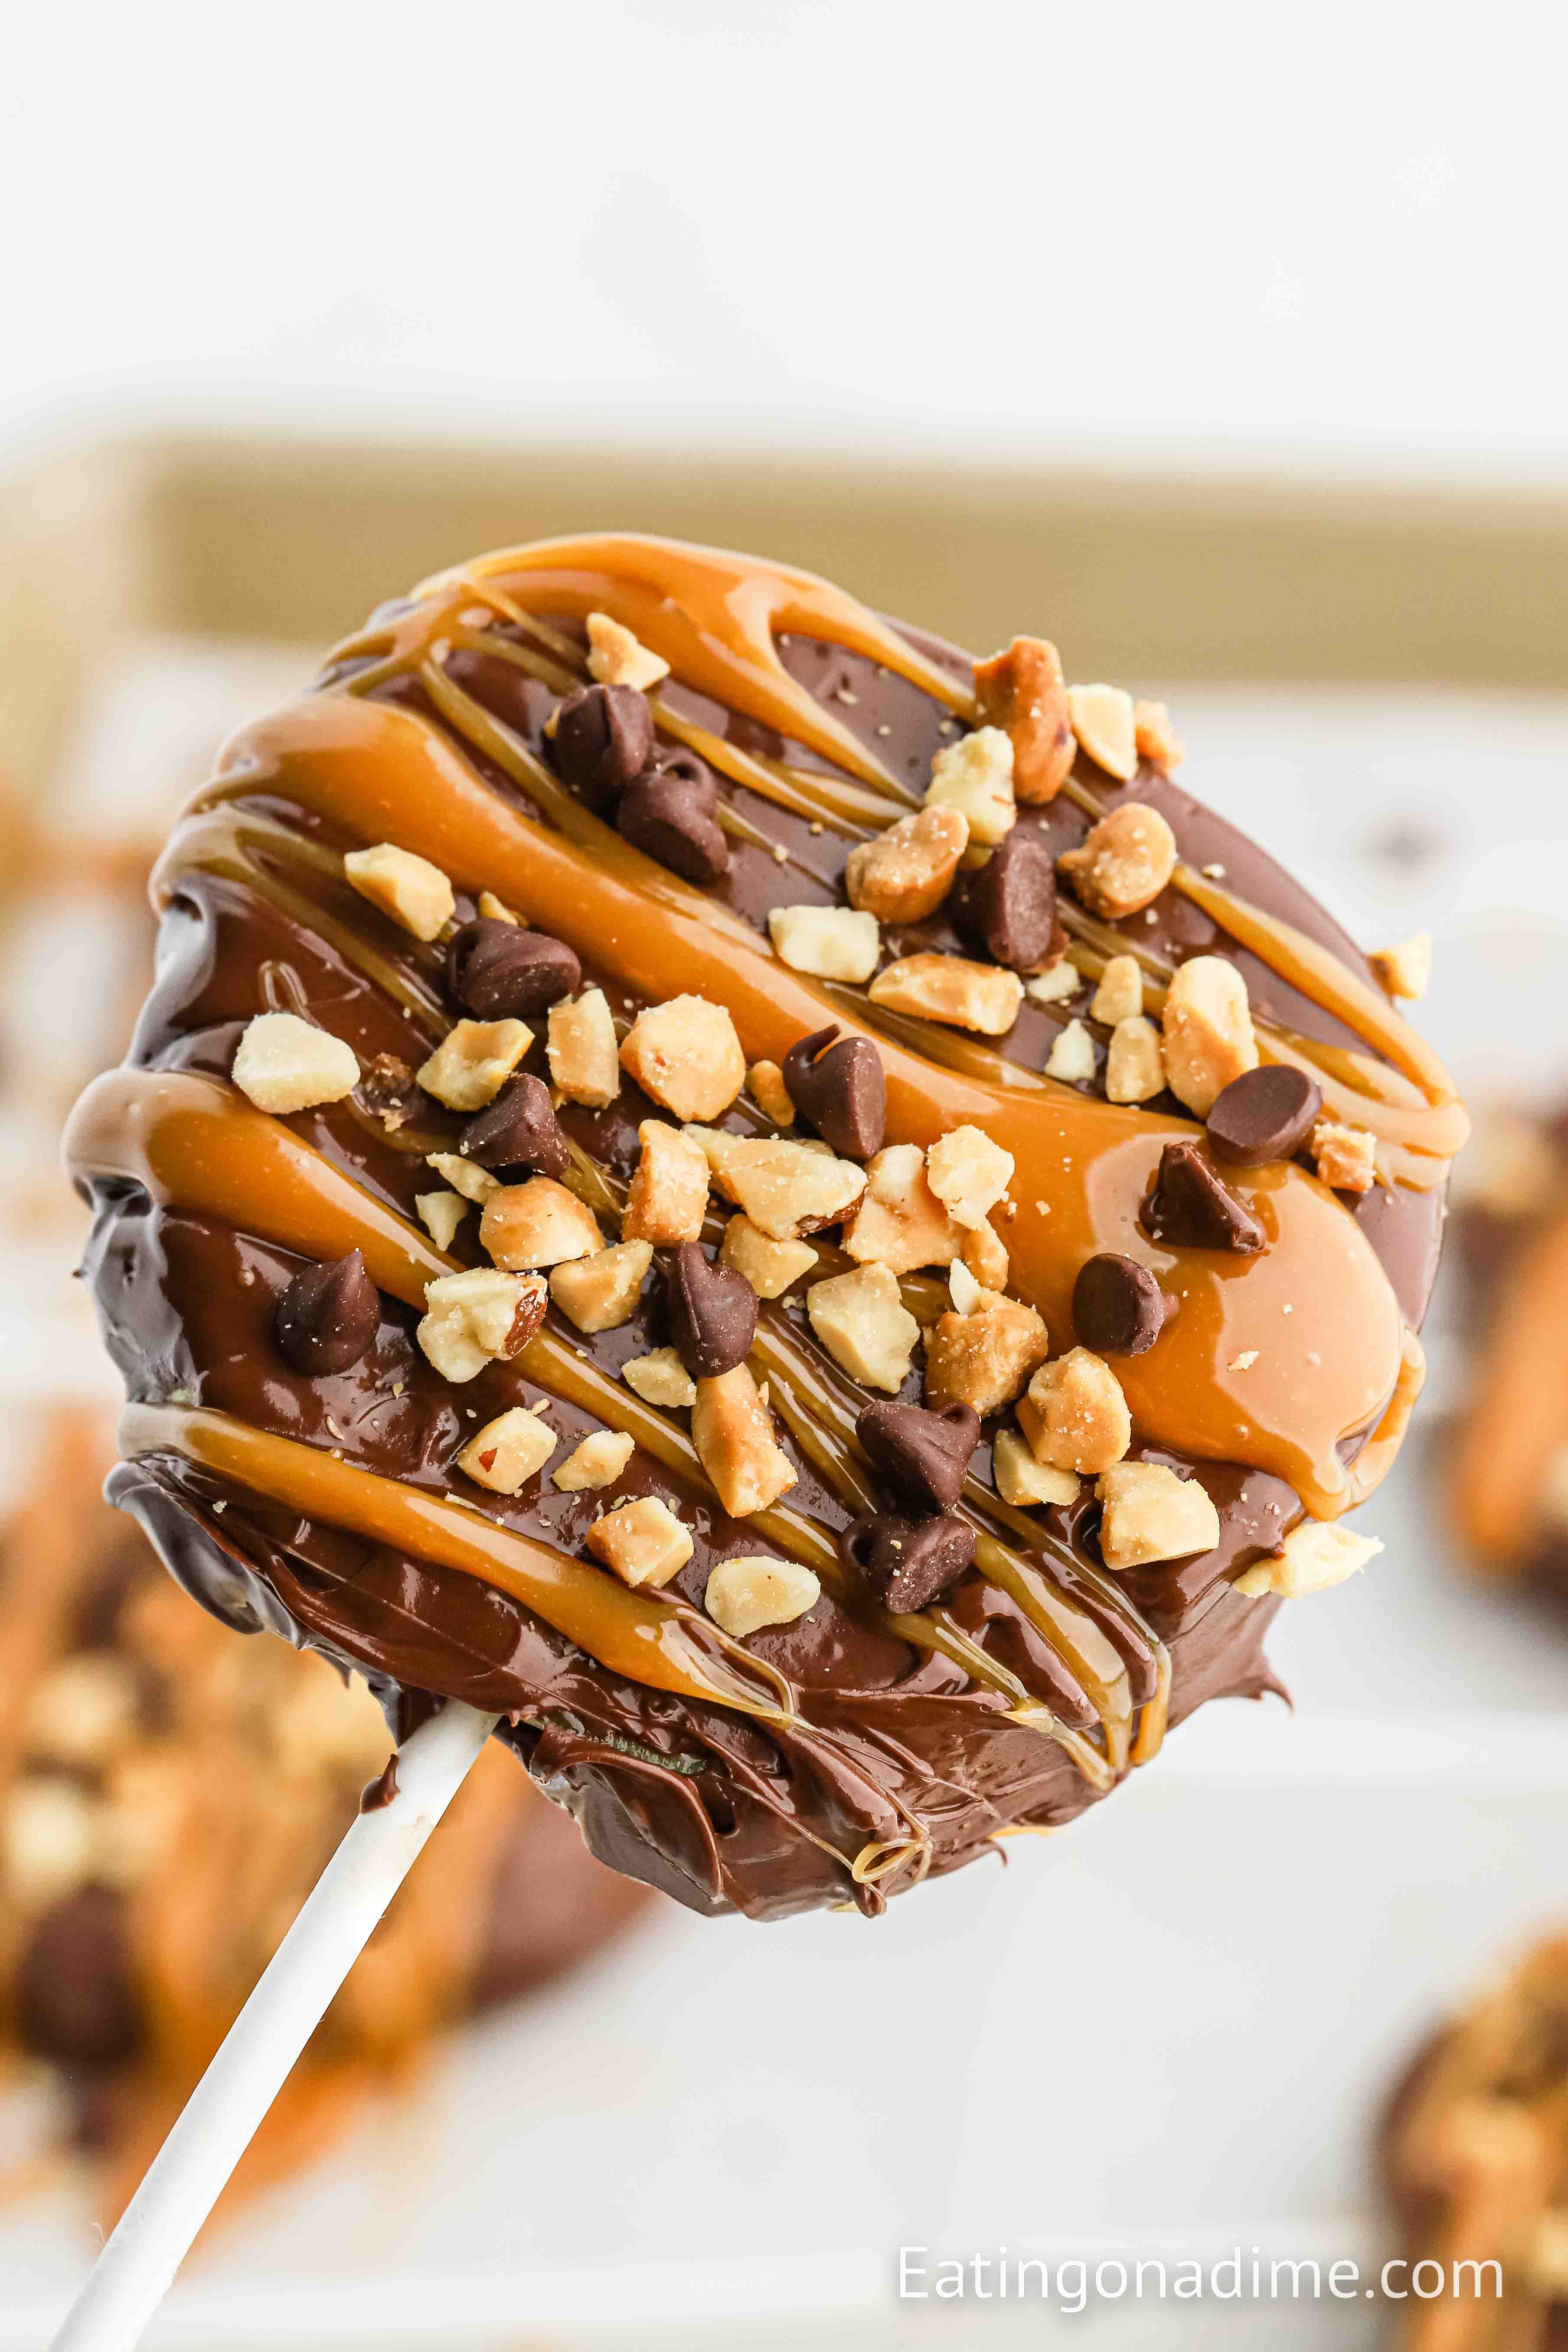 Apple slice on a stick drizzled with caramel and topped with chopped nuts and chocolate chips